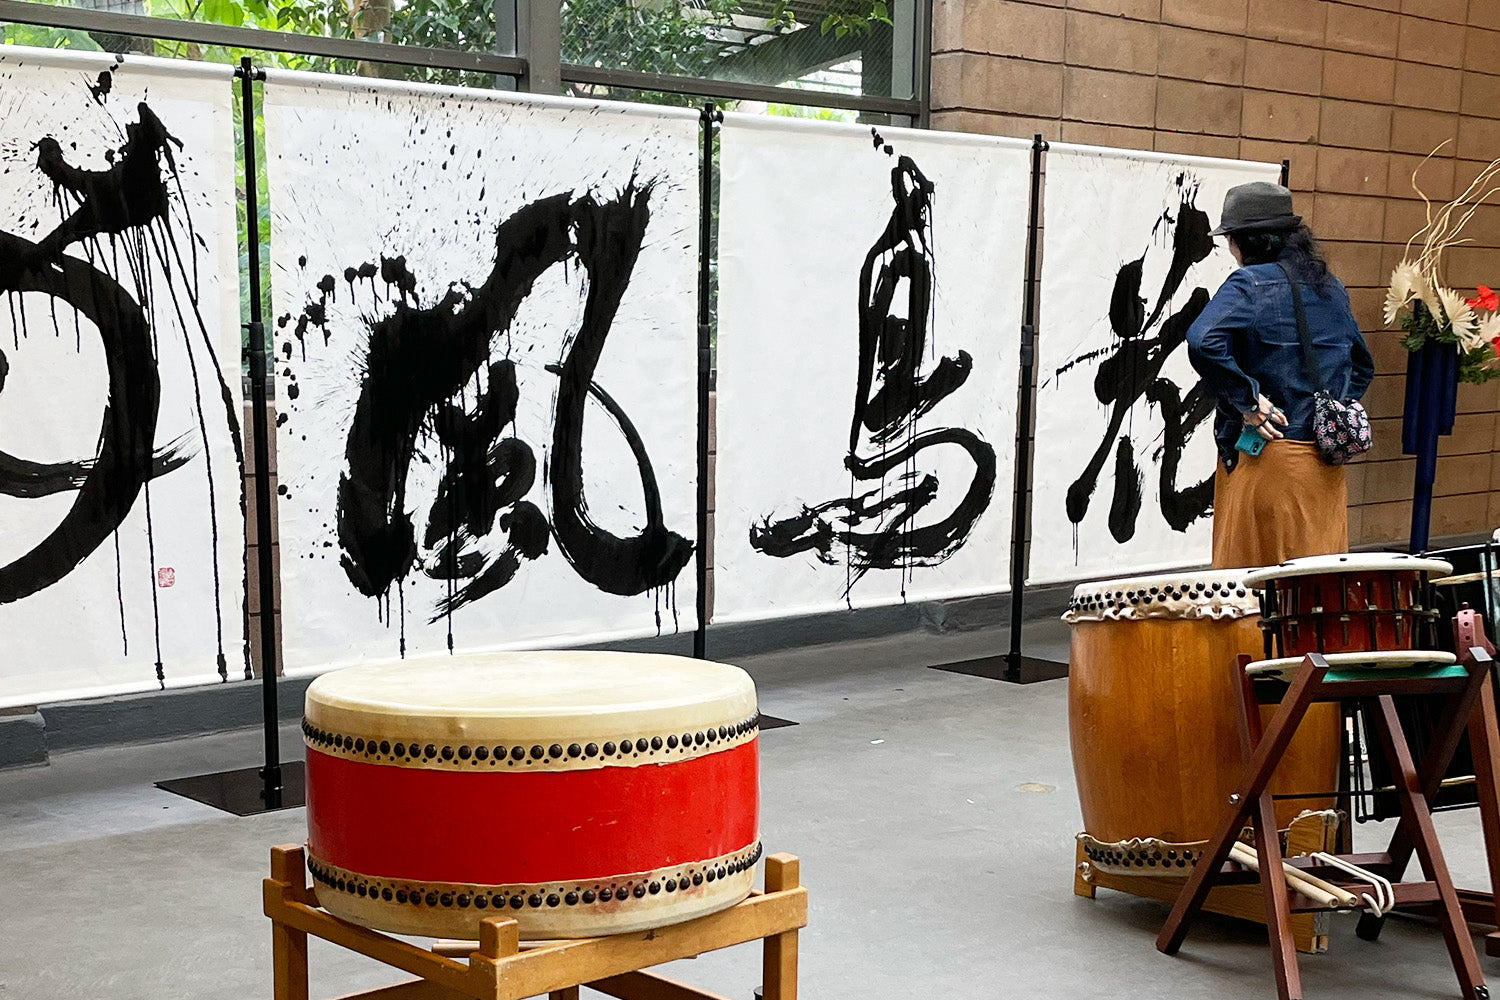 A performance-goer for a San Francisco “ikebana” exhibit admires a huge calligraphy piece, painted in-person by Aoi Yamaguchi’s during the event.